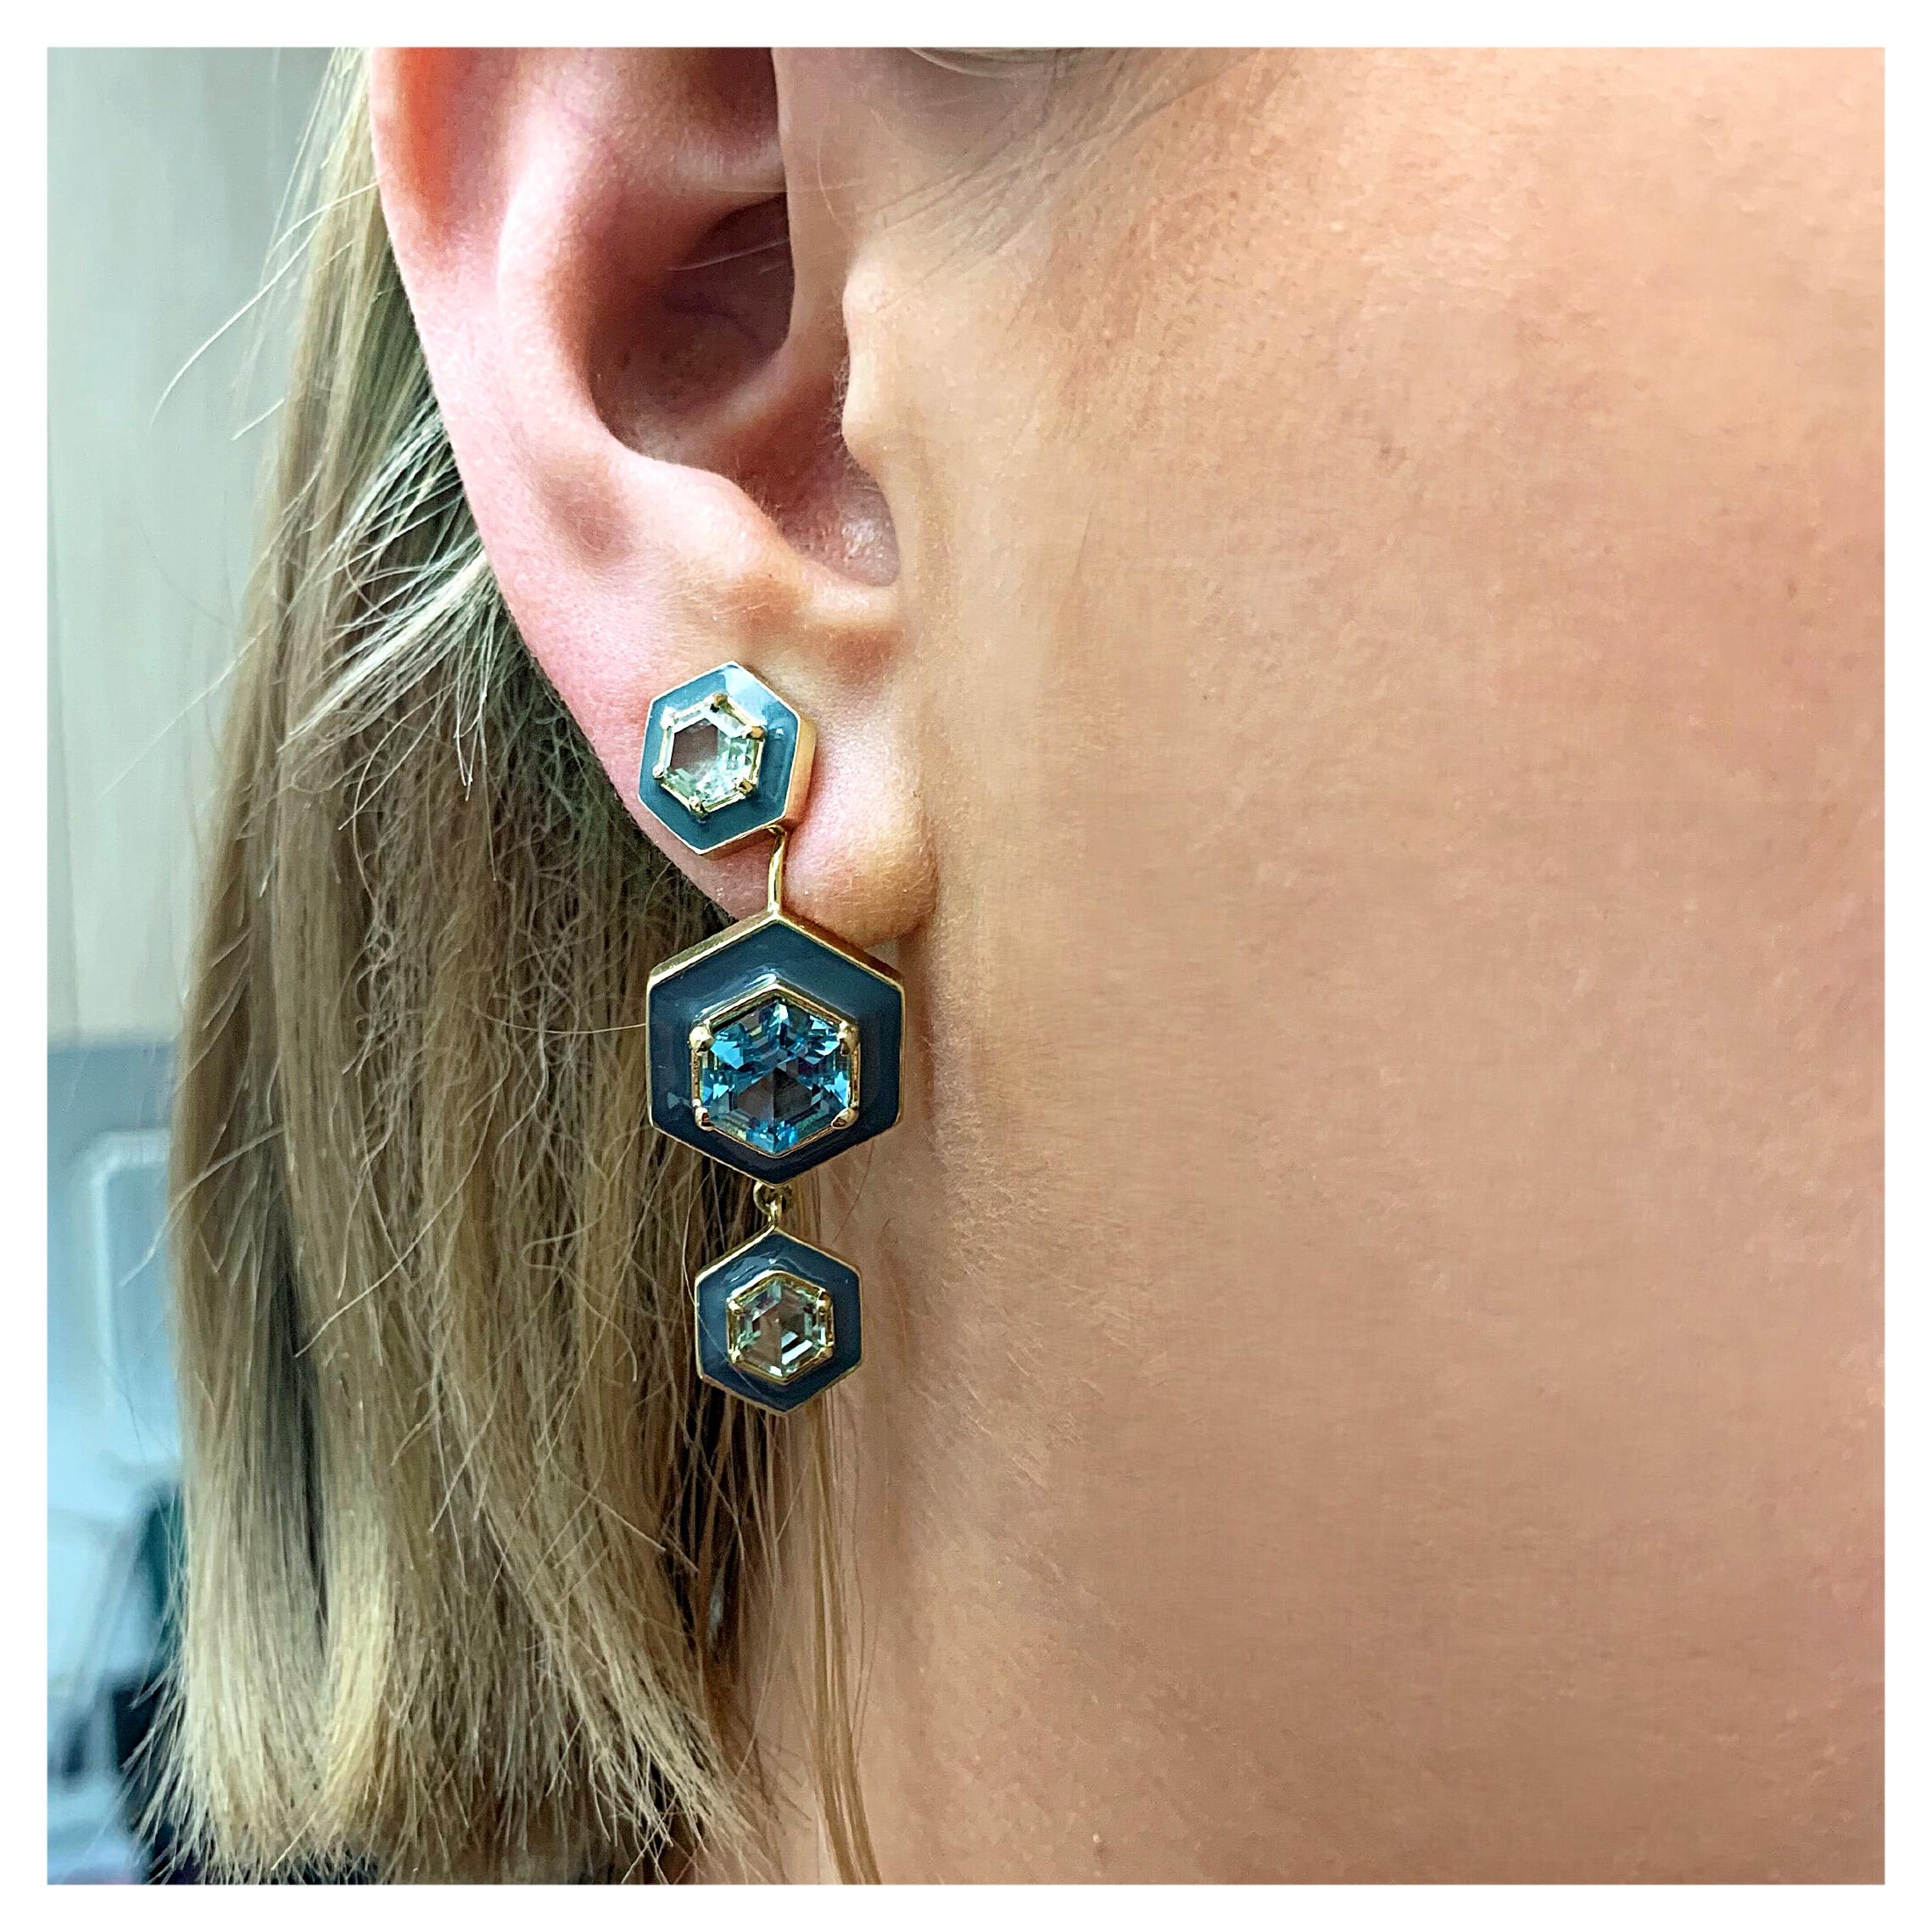 Gorgeous custom cut green and blue topaz in modern, geometric shapes, are surrounded by a frame of dark grey enamel.  These earrings are statement making with strong color and form.  They work well with casual clothes, yet can be elegant for